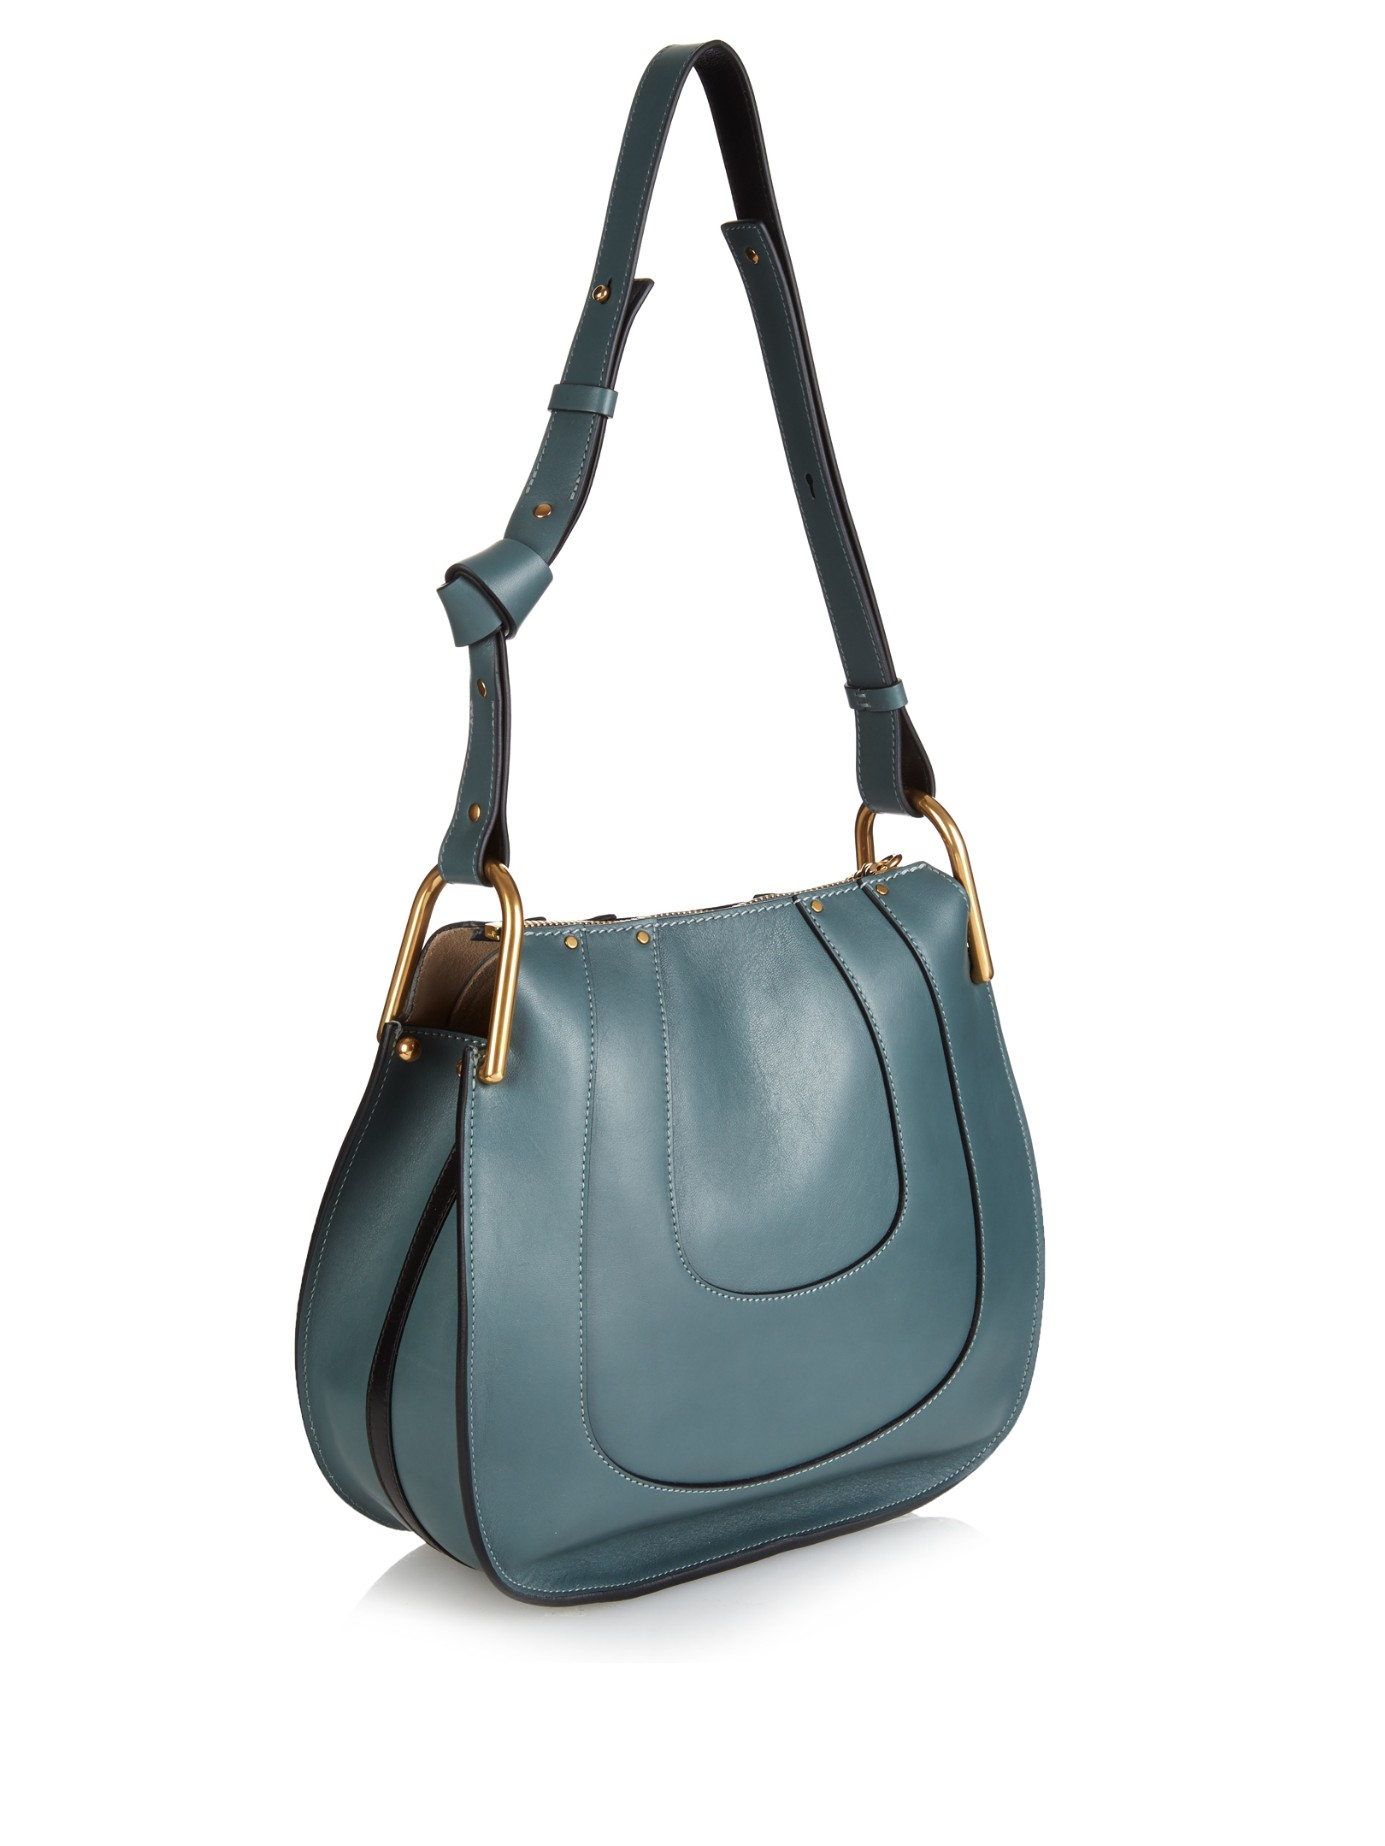 Chloé Hayley Small Suede And Leather Shoulder Bag in Blue - Lyst